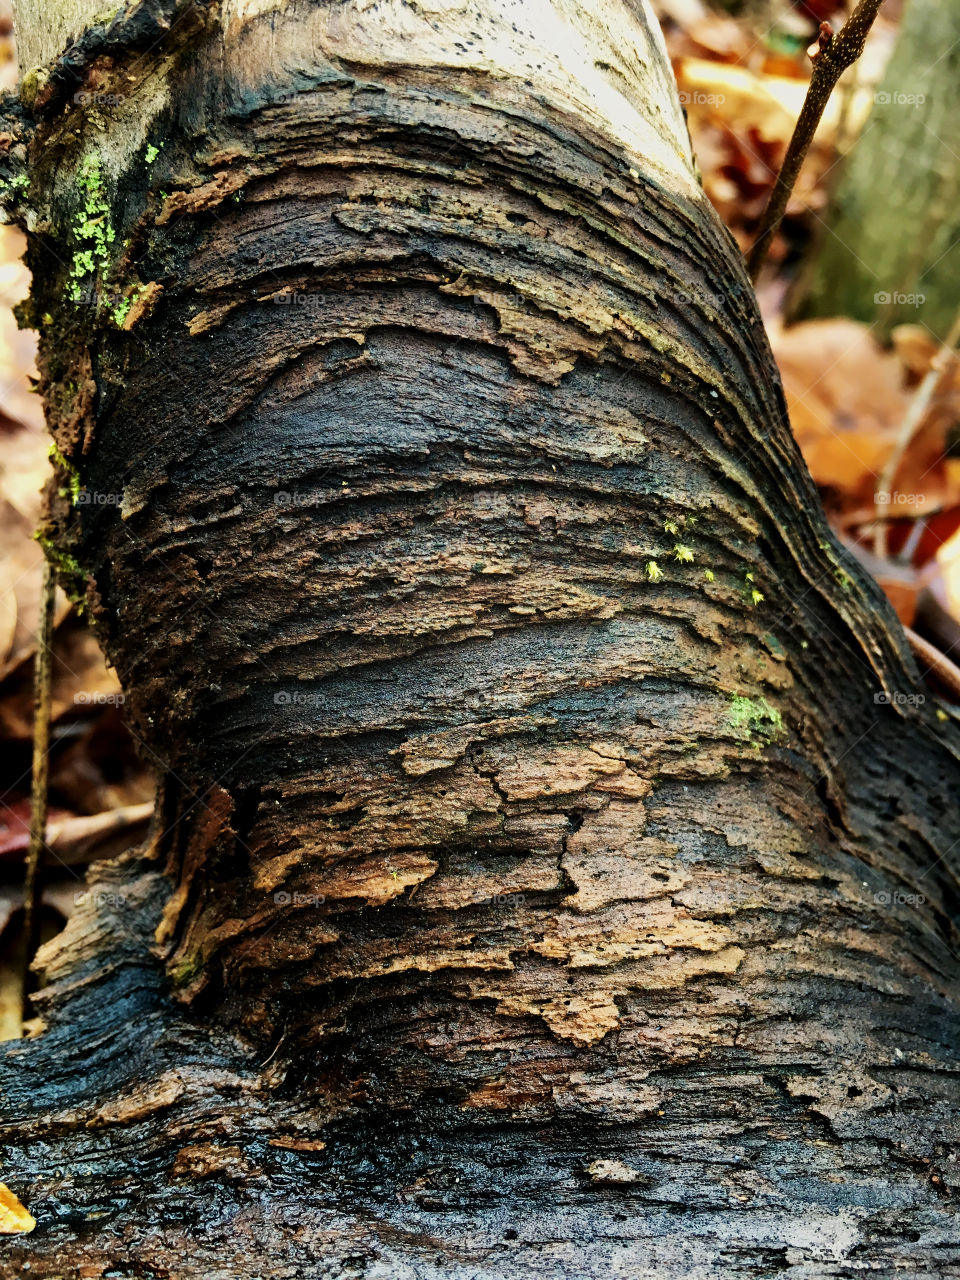 Organic texture of a decaying limb on an old downed tree